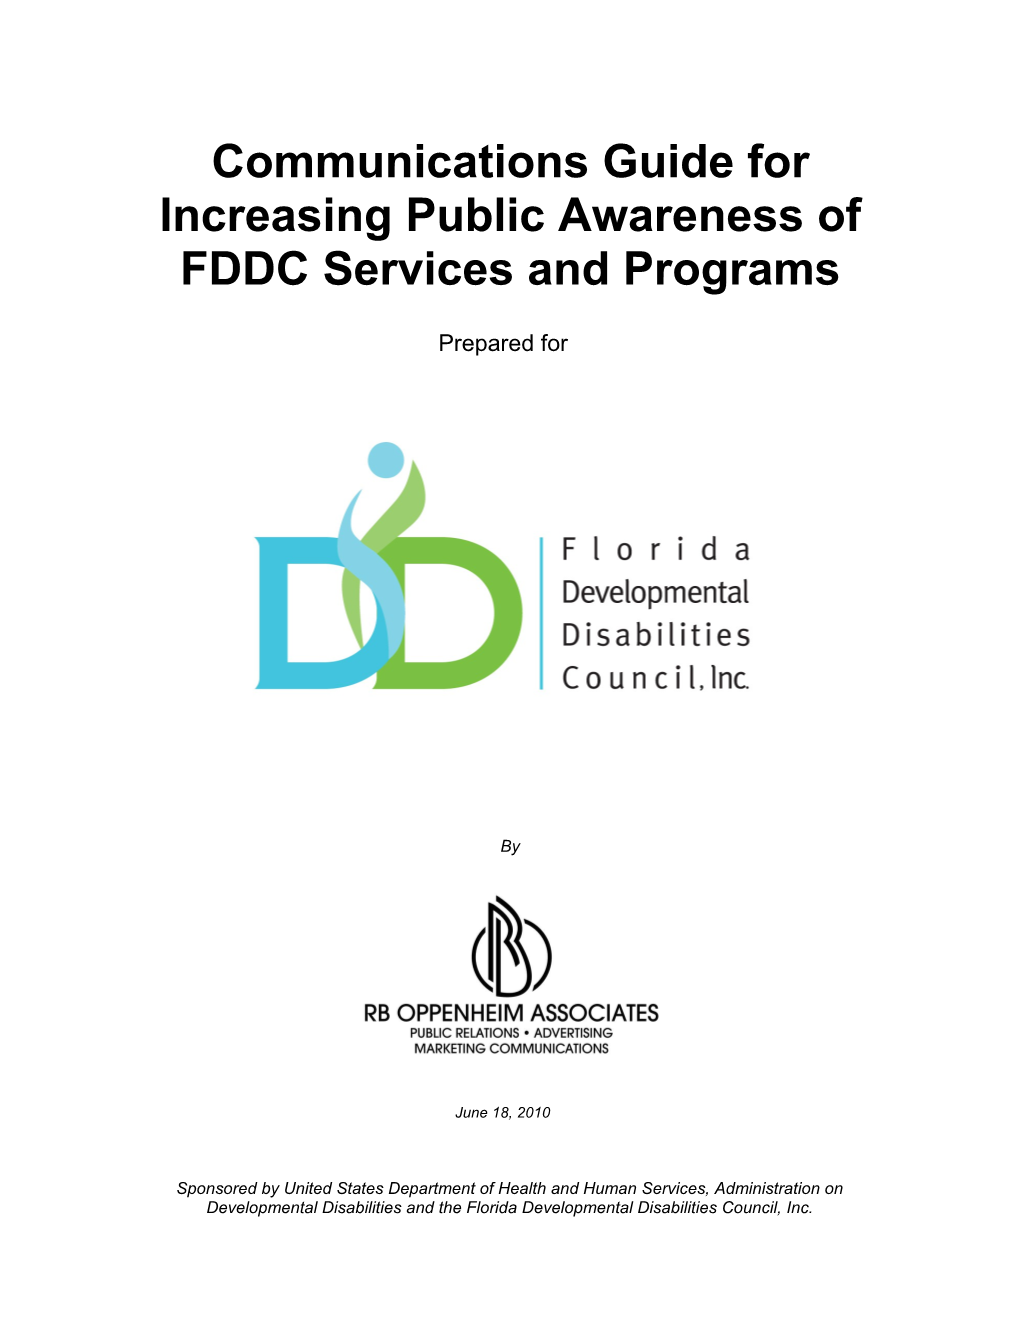 Communications Guide for Increasing Public Awareness Offddc Servicesand Programs